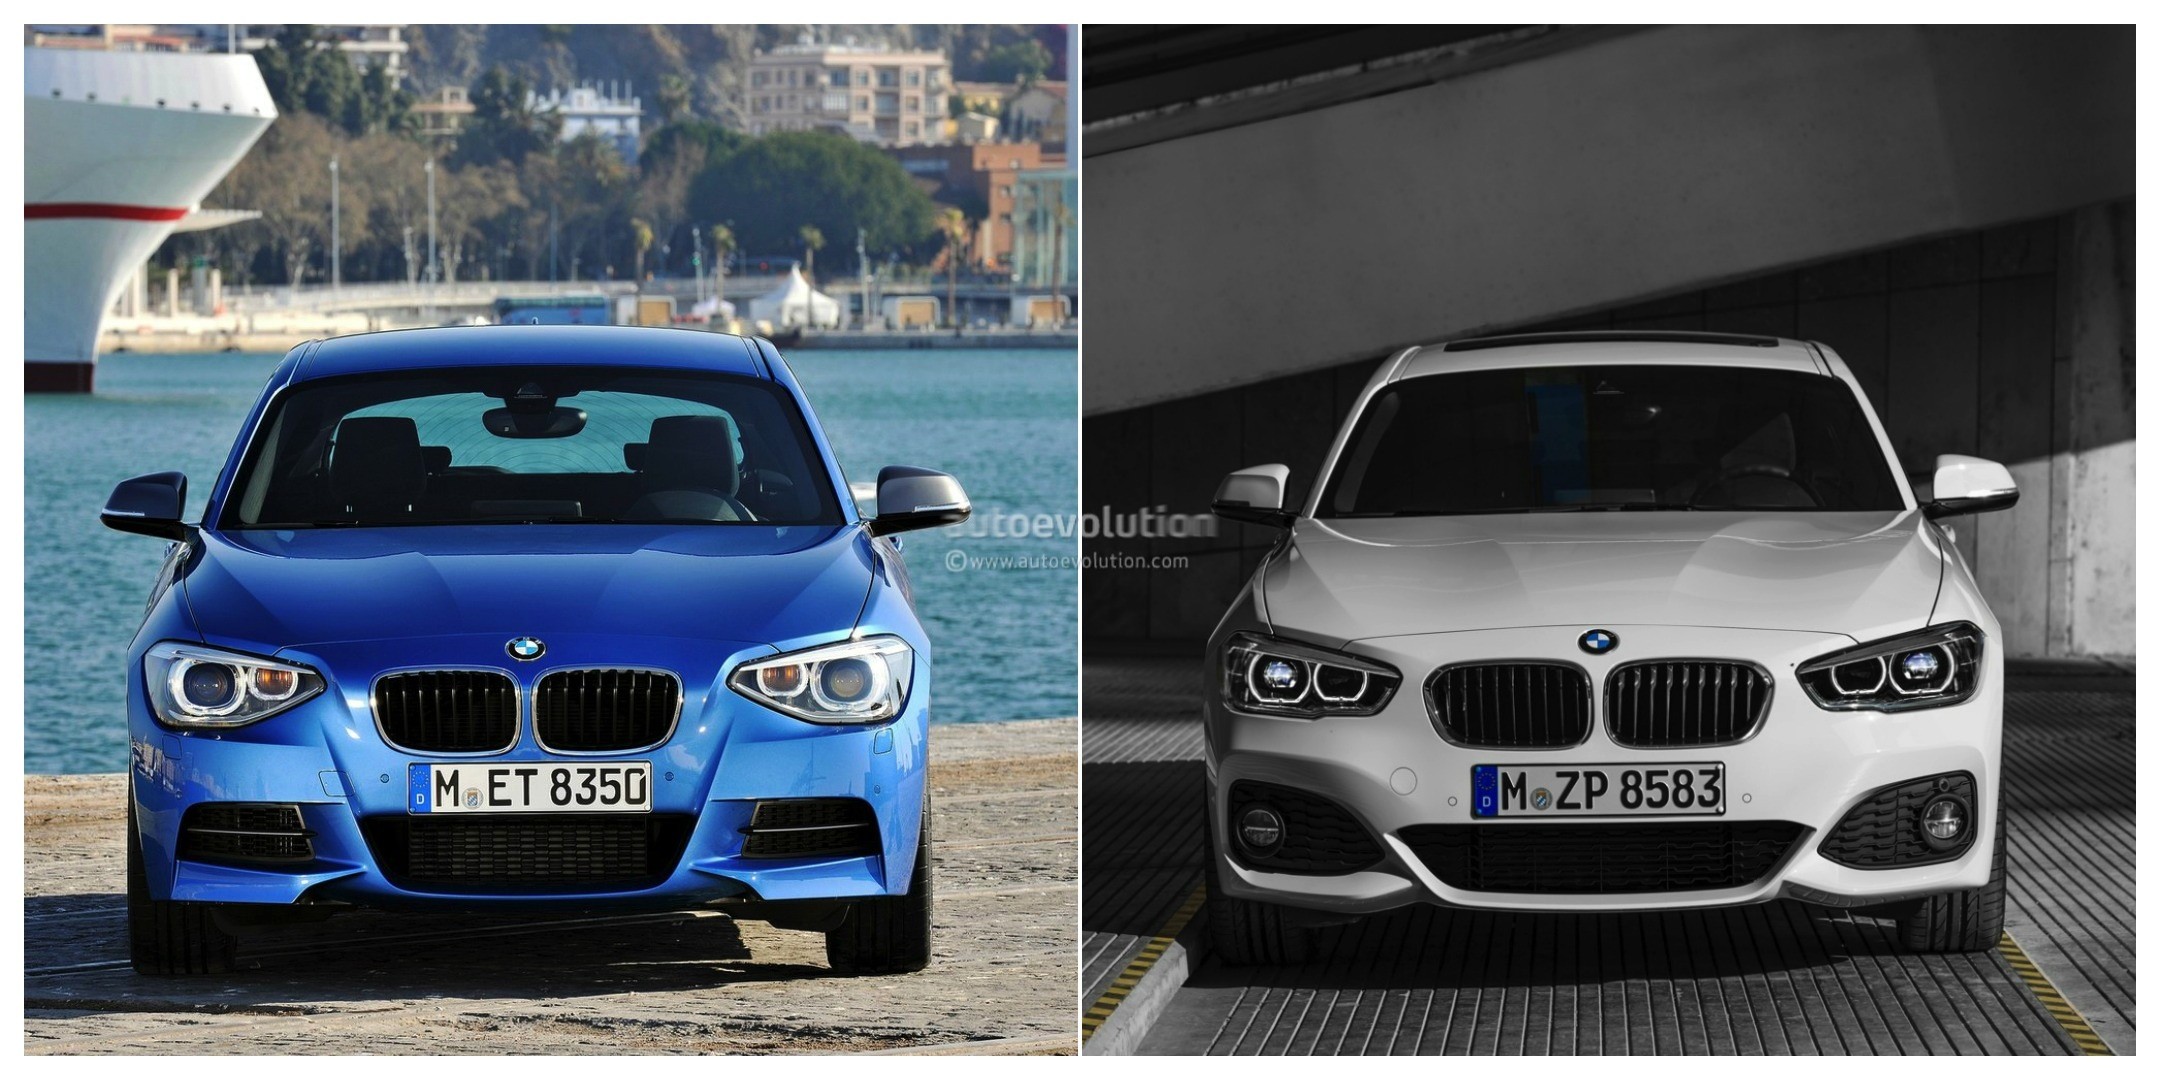 bmw f10 facelift differences